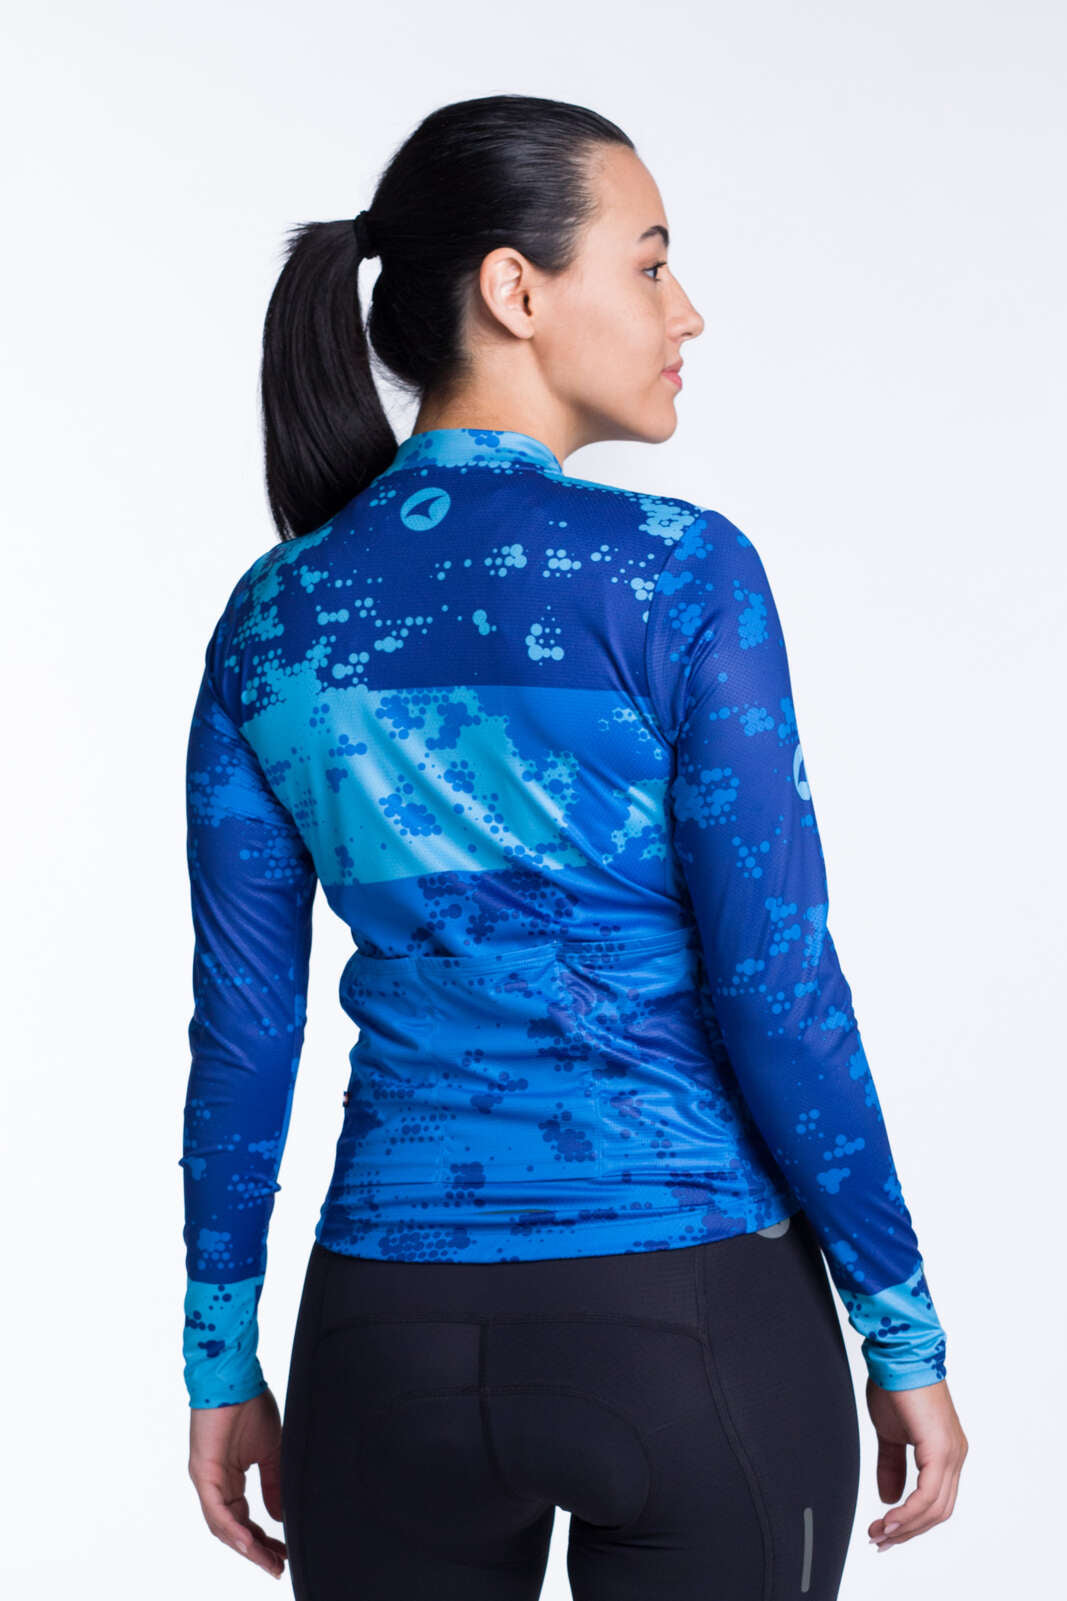 Women's Blue Long Sleeve Cycling Jersey - Ascent Disperse Back View